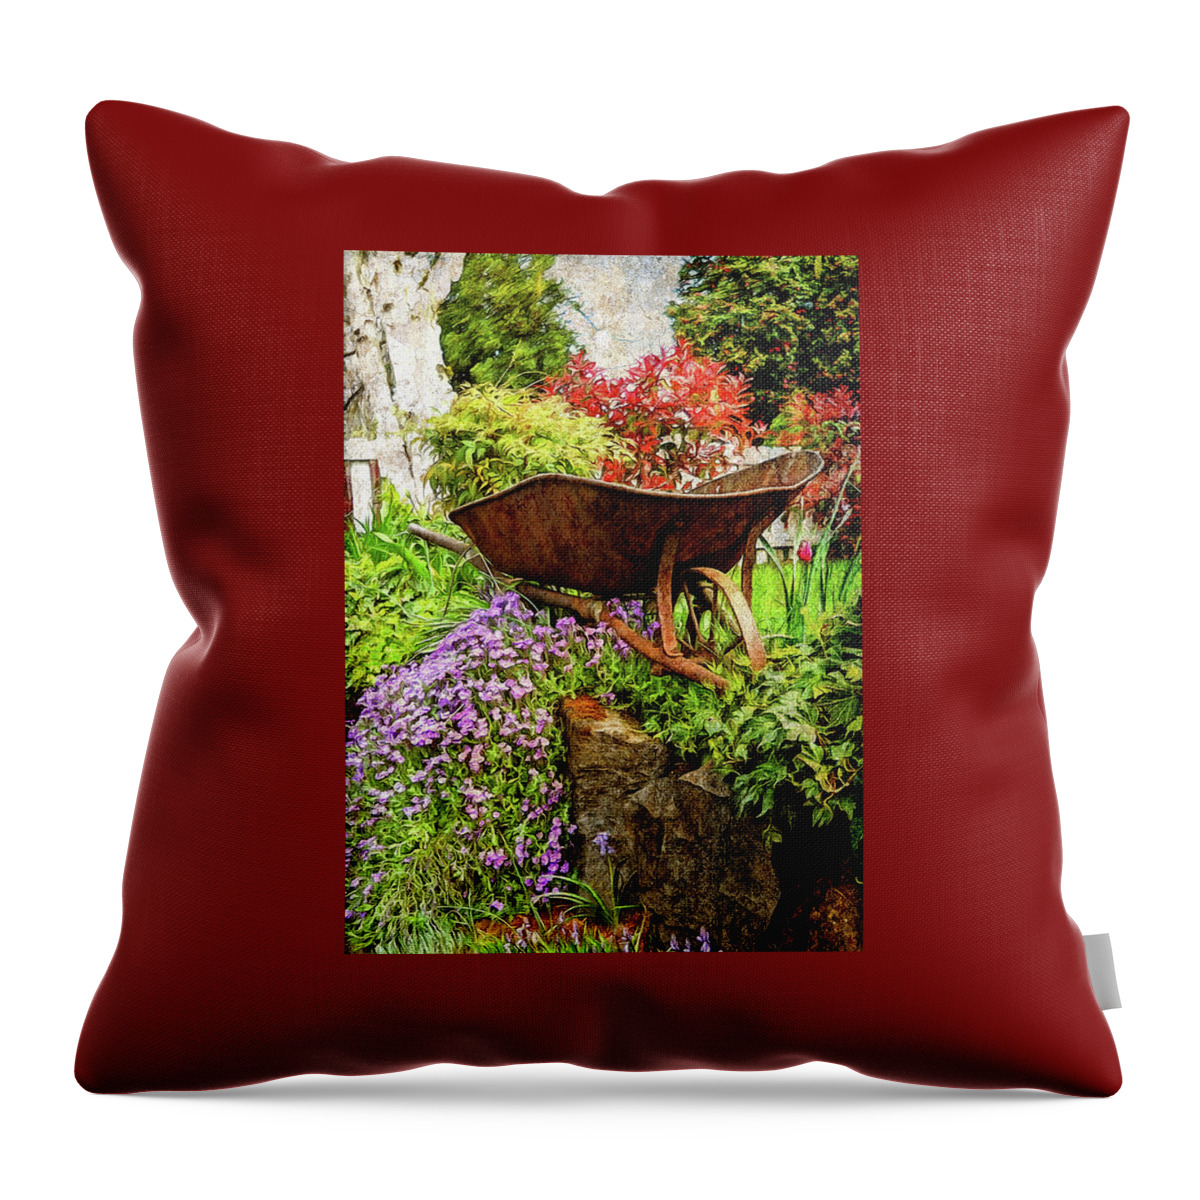 Pictures Of Flowers Throw Pillow featuring the photograph The Whimsical Wheelbarrow by Thom Zehrfeld